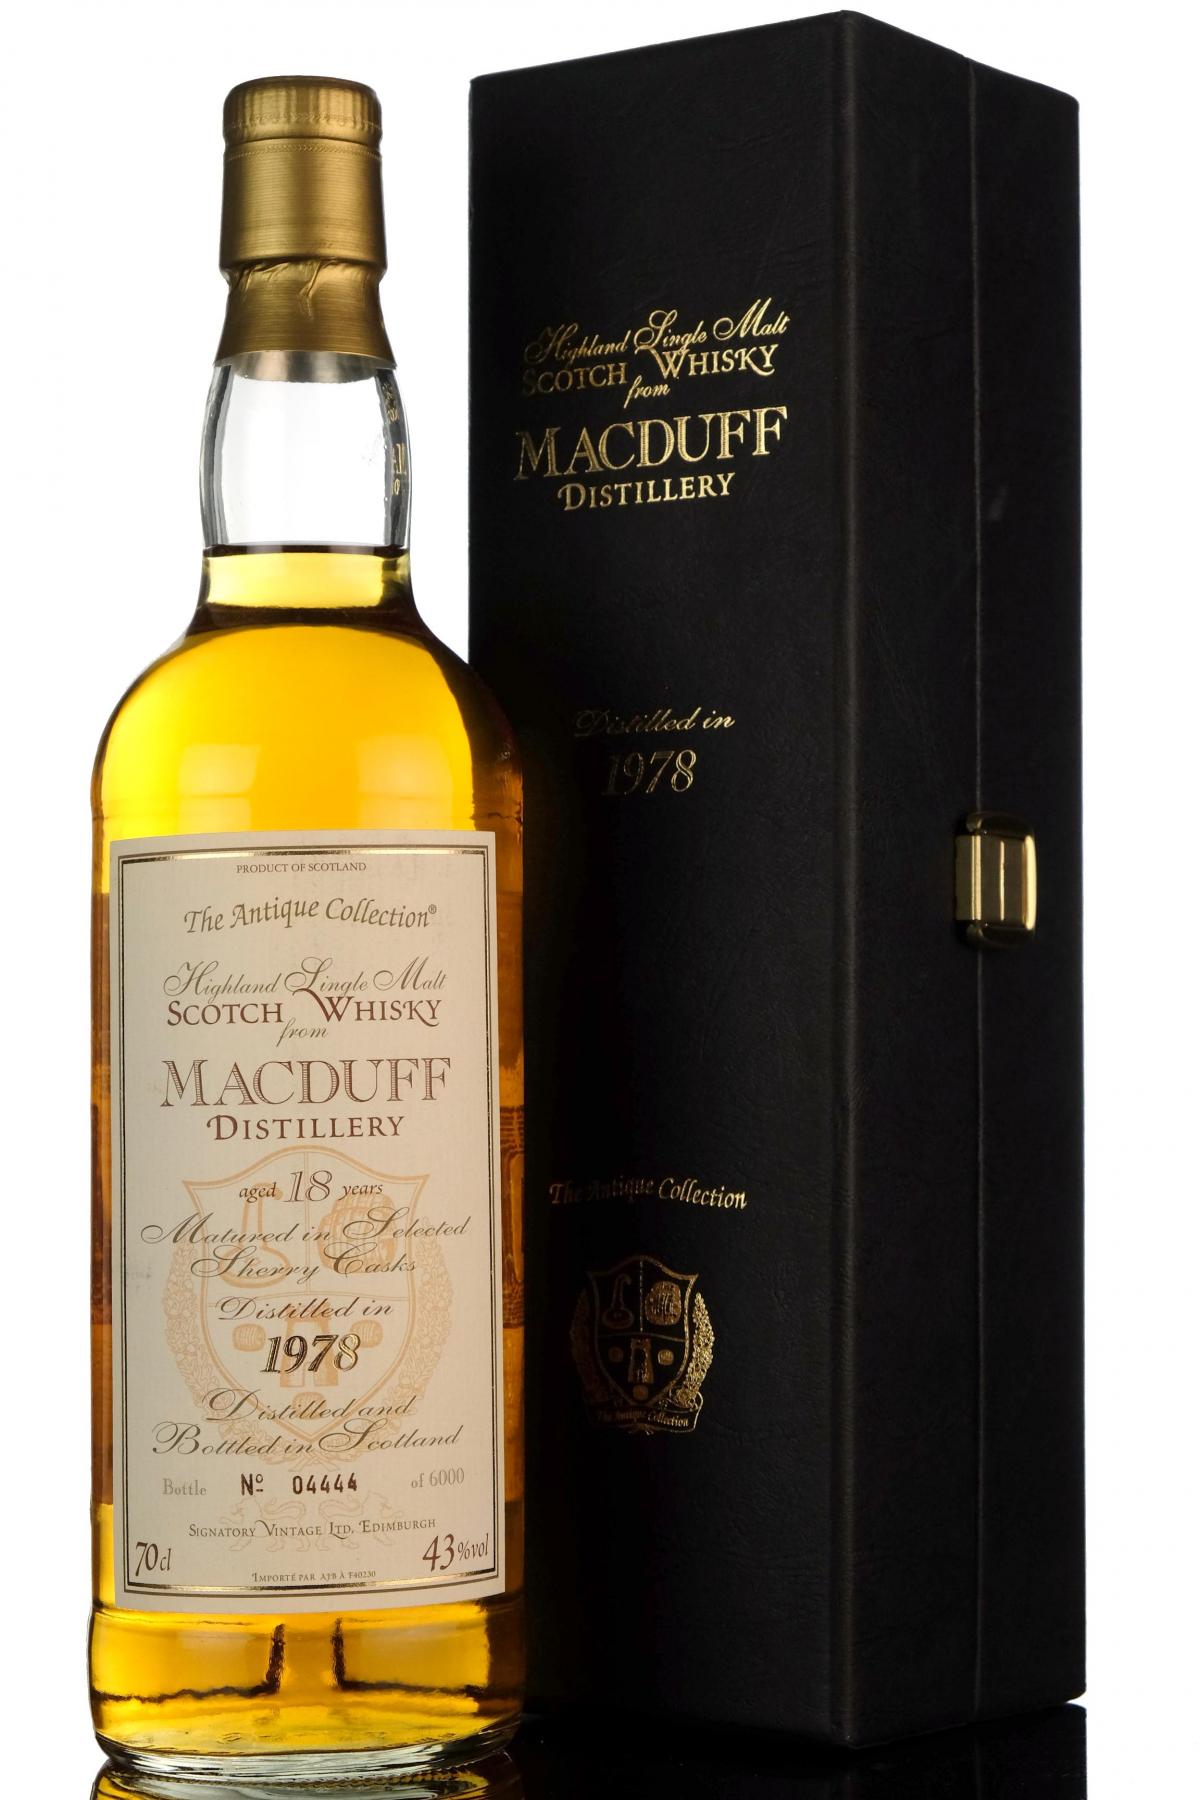 Macduff 1978-1996 - 18 Year Old - Signatory Vintage - The Antique Collection